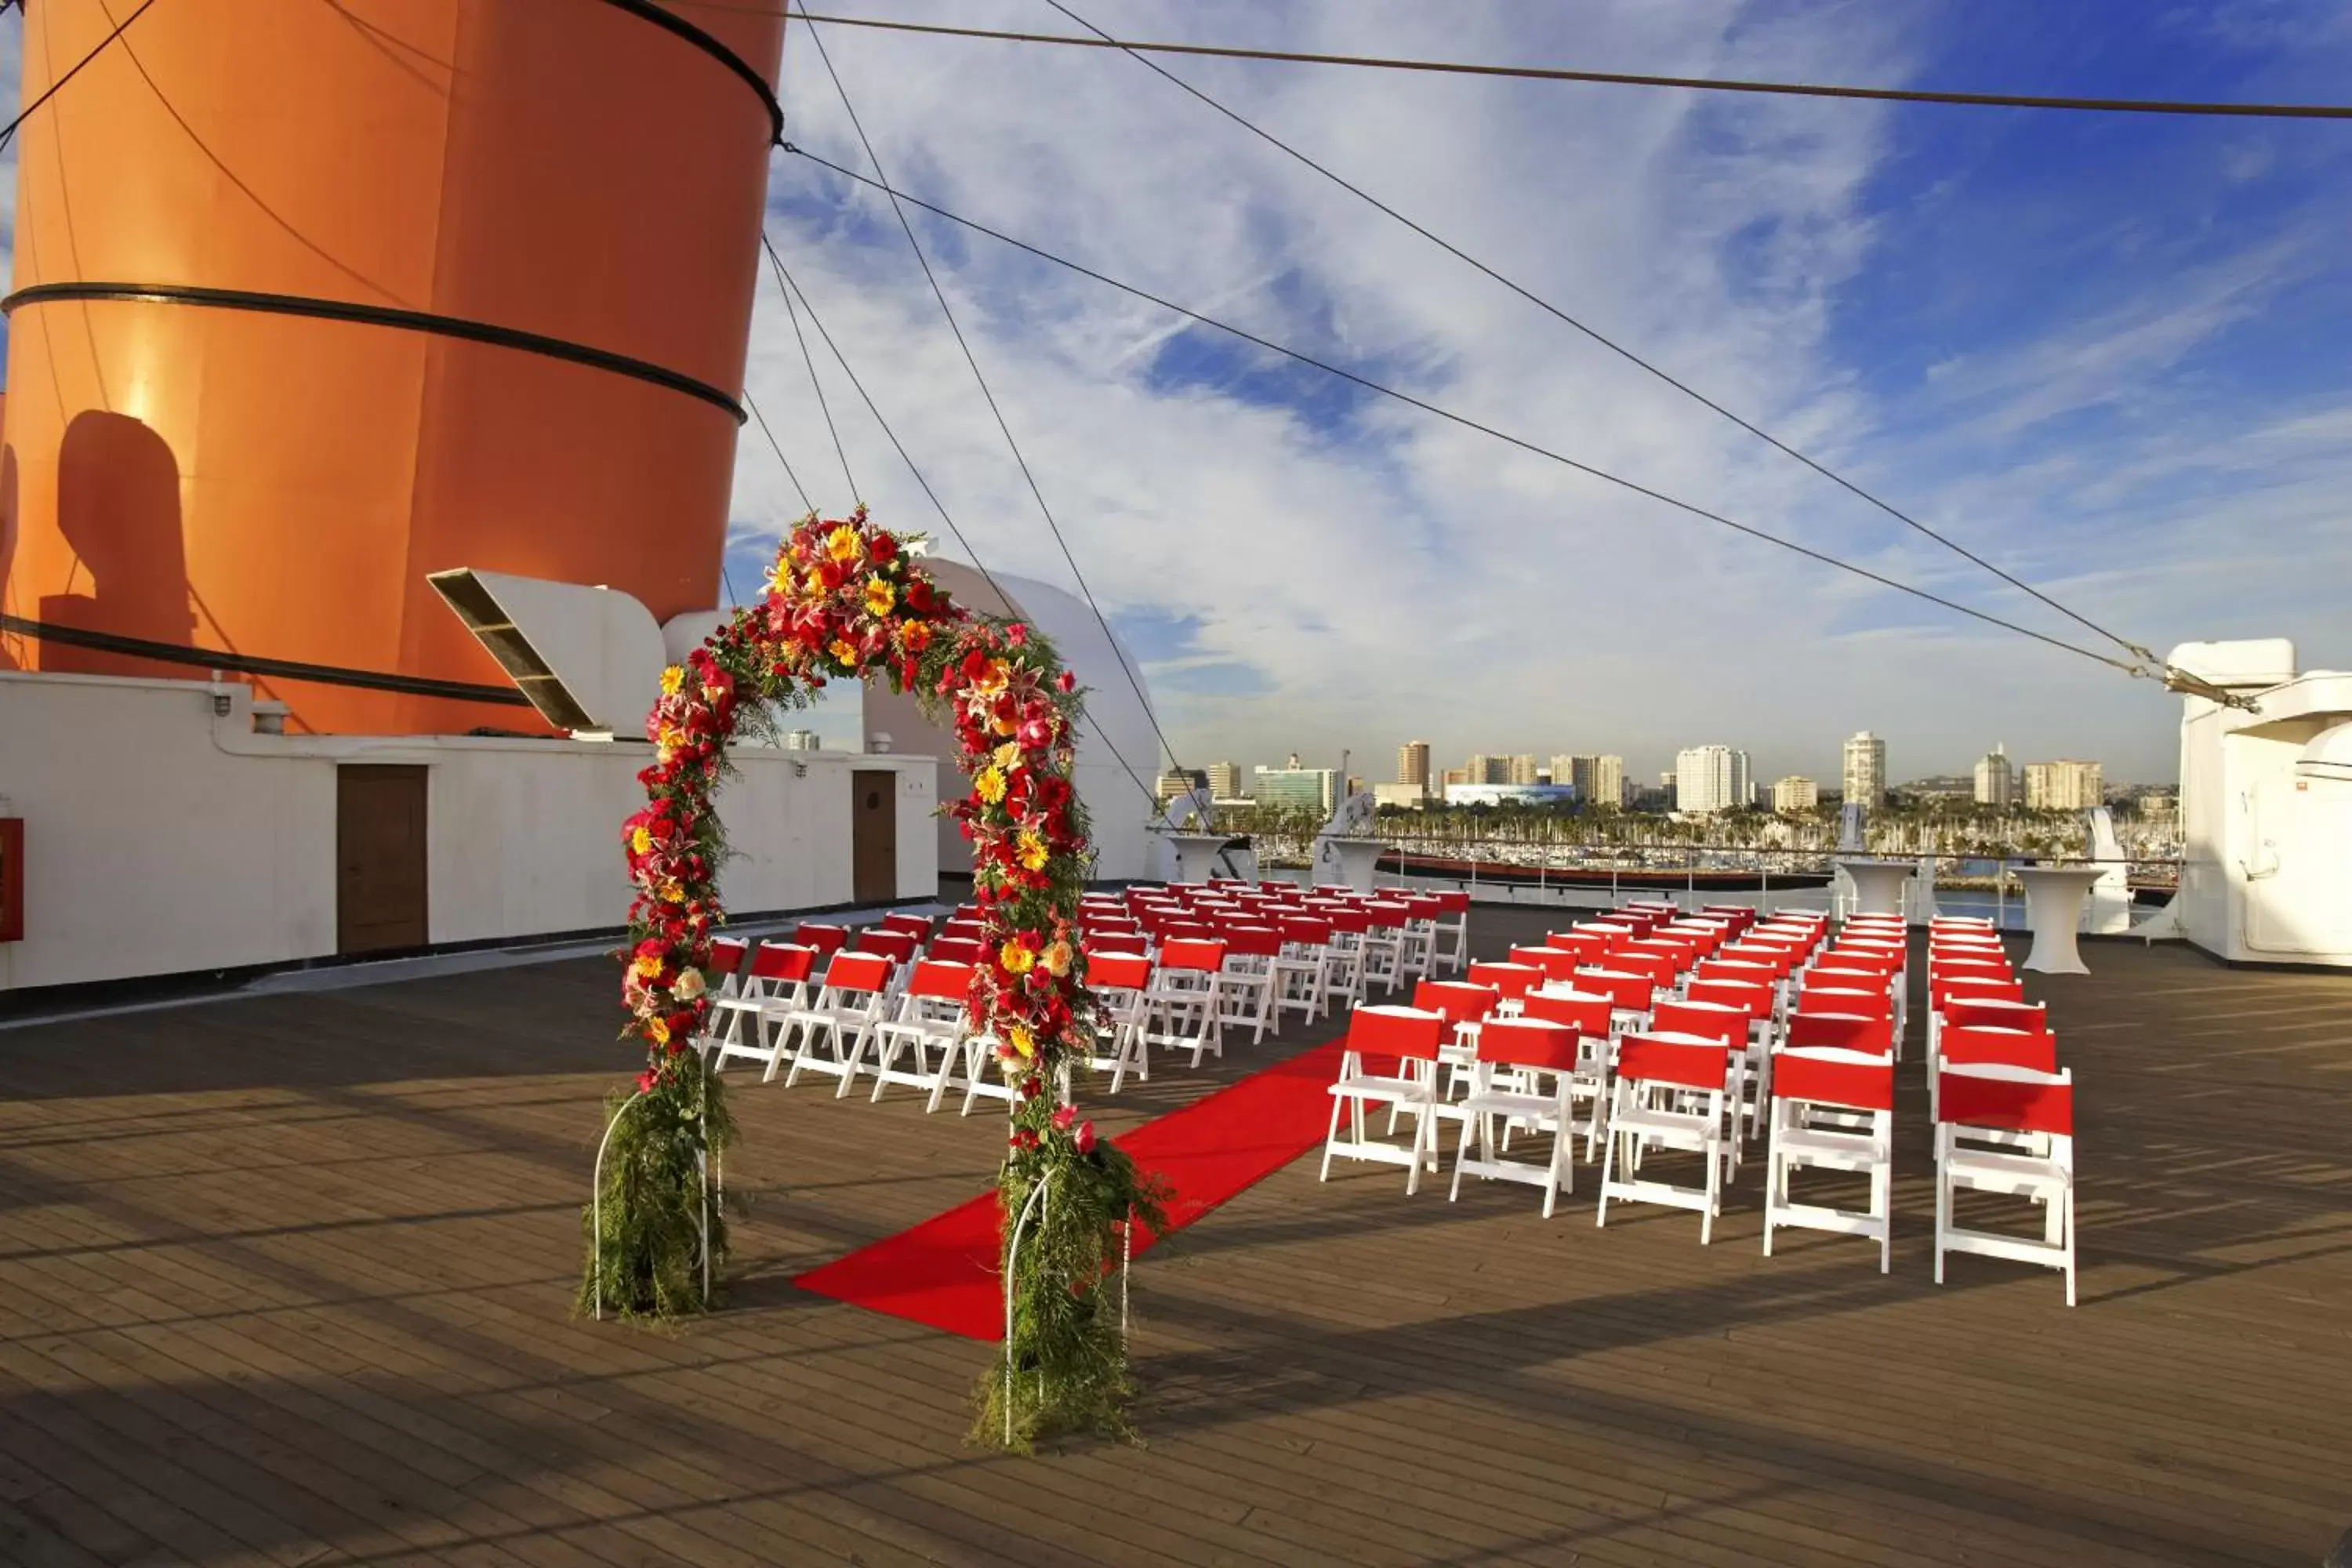 Banquet/Function facilities in The Queen Mary